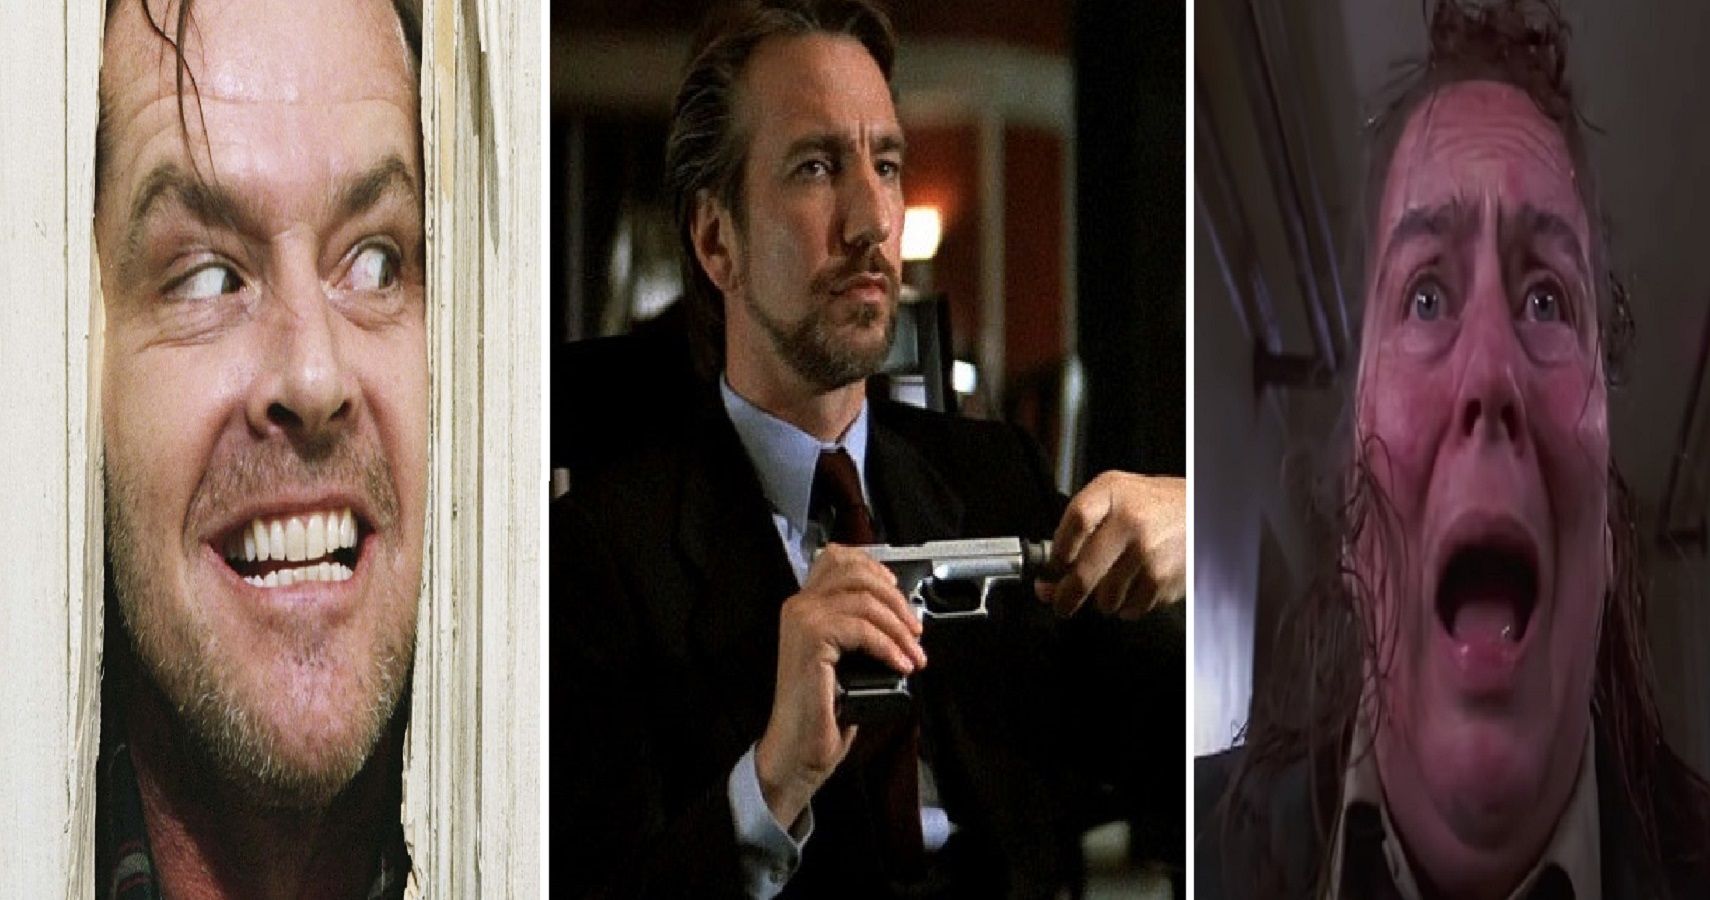 A split image of Jack Torrance in The Shining, Hans Gruber in Die Hard and Miss. Trunchbull in Matilda